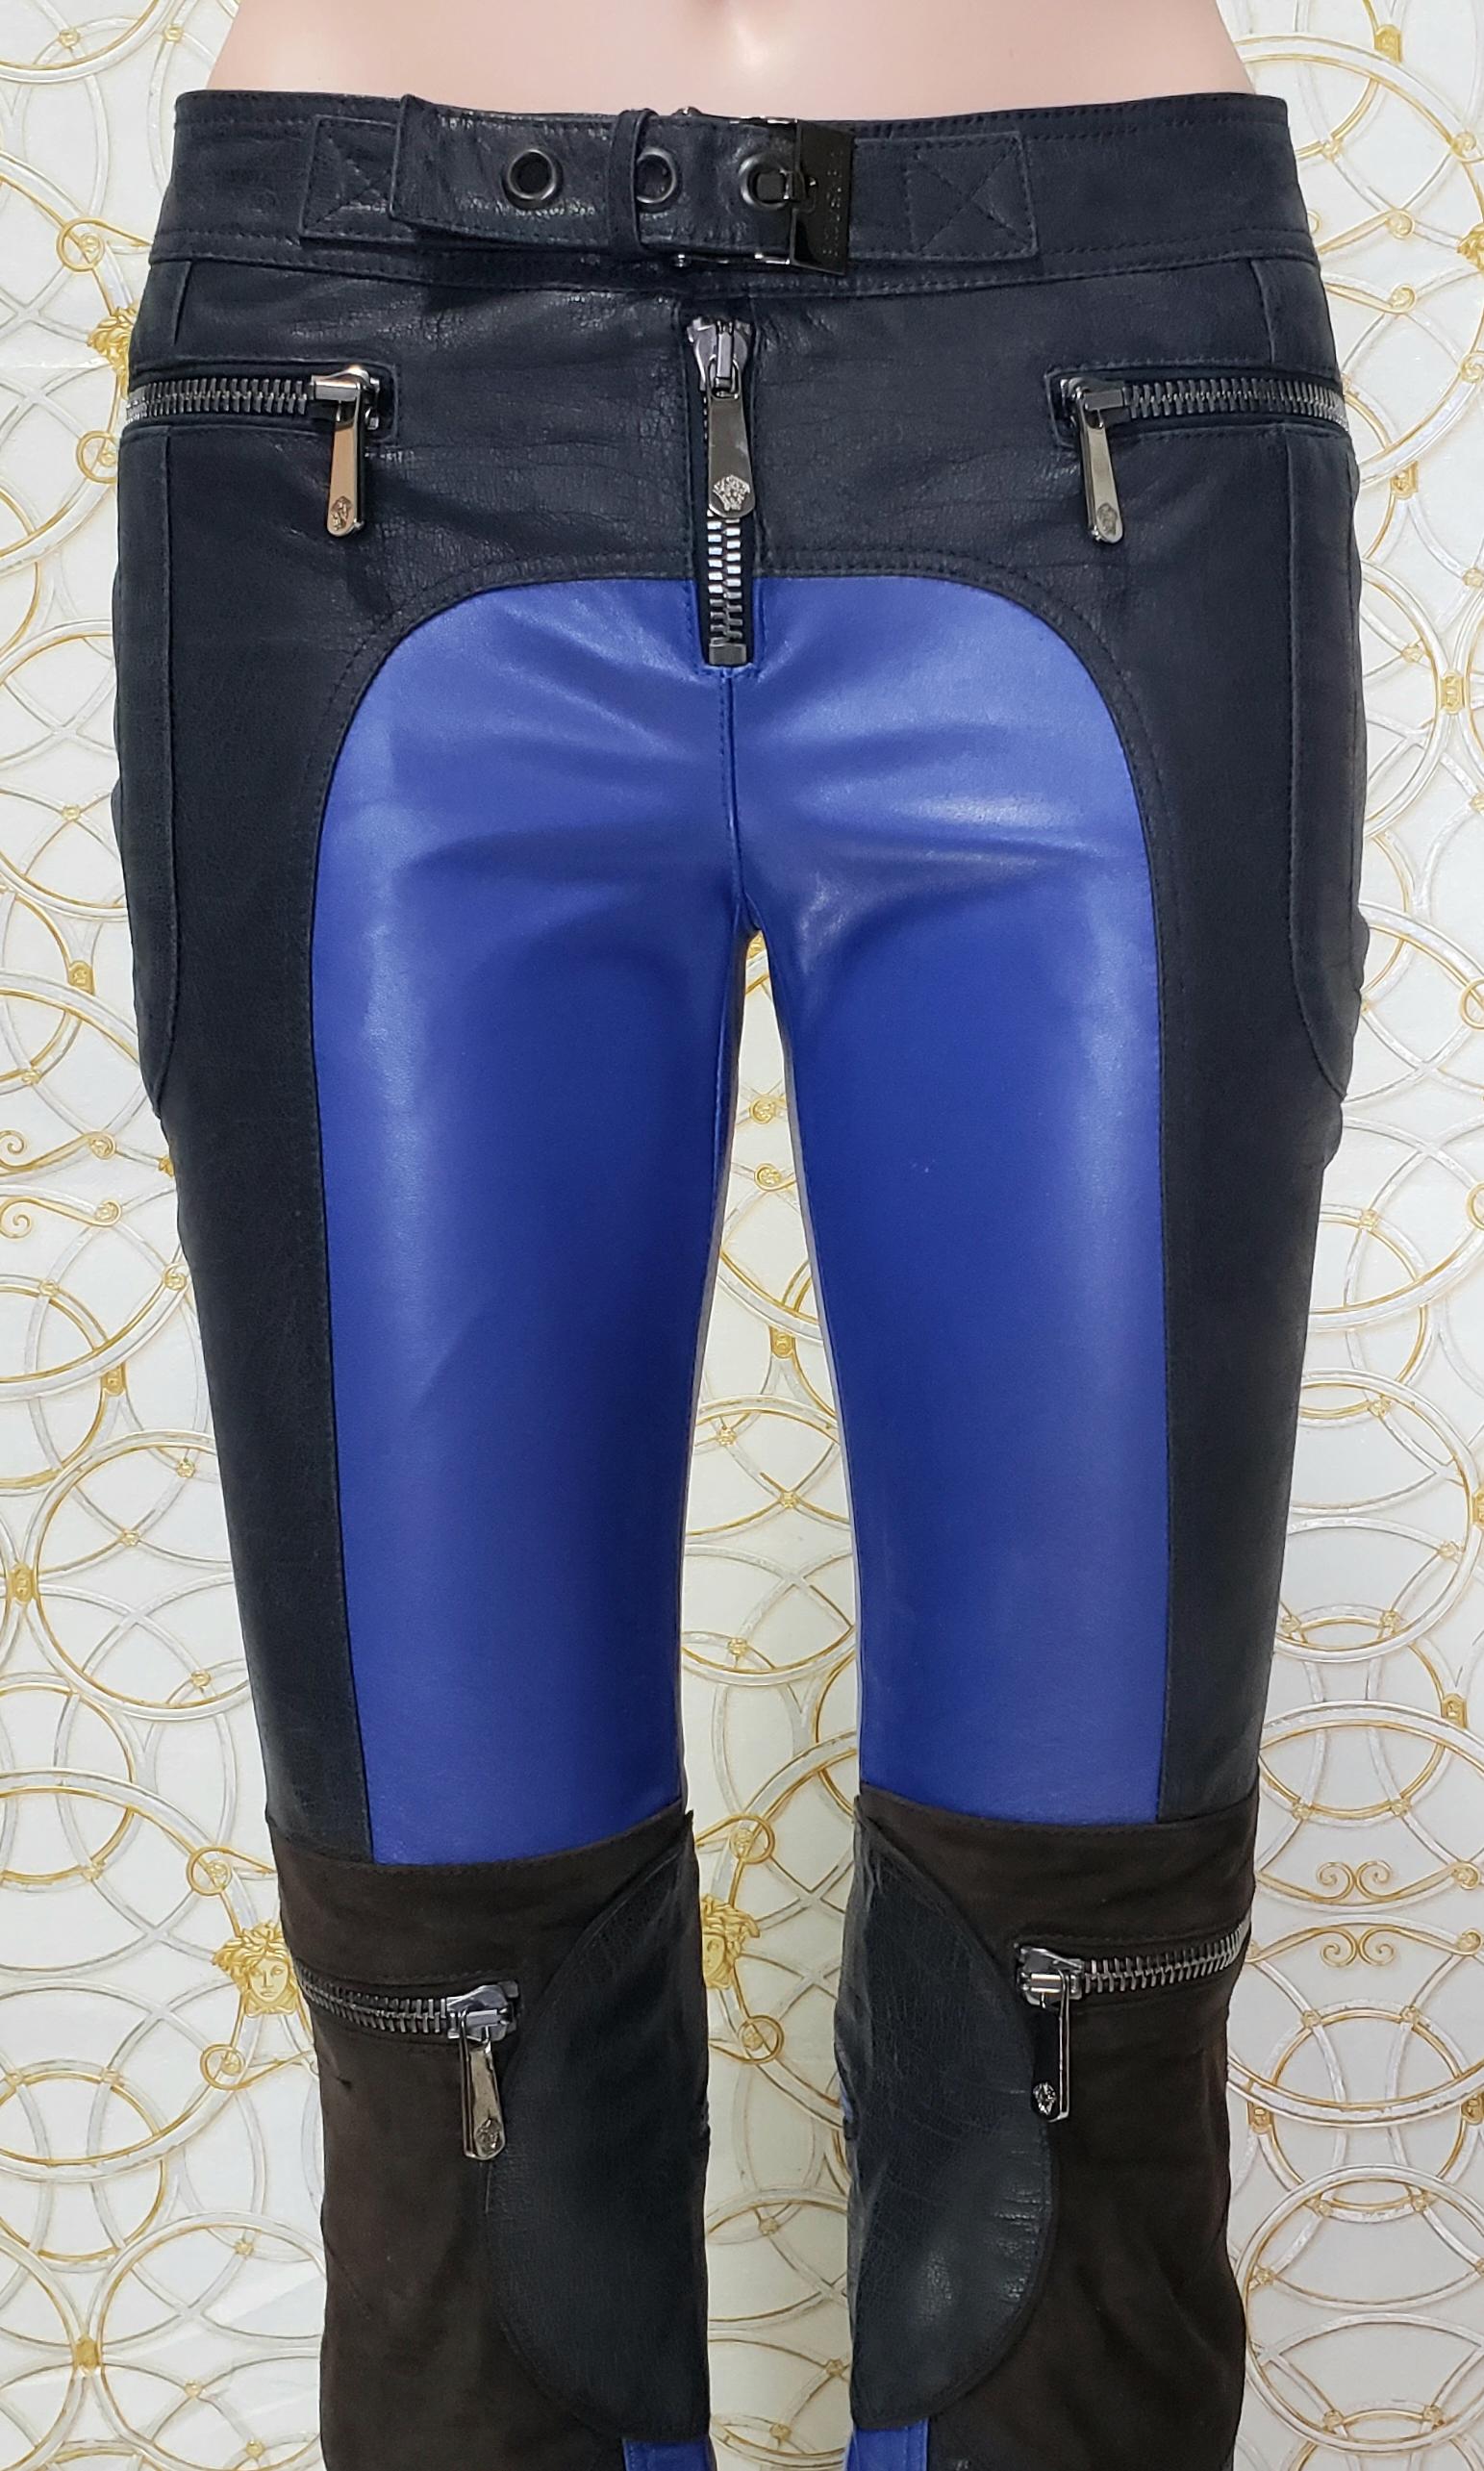 F/W 2010 L #13 VERSACE BLUE and NAVY BLUE MOTORCYCLE LEATHER PANTS size 38 - 2 For Sale 2